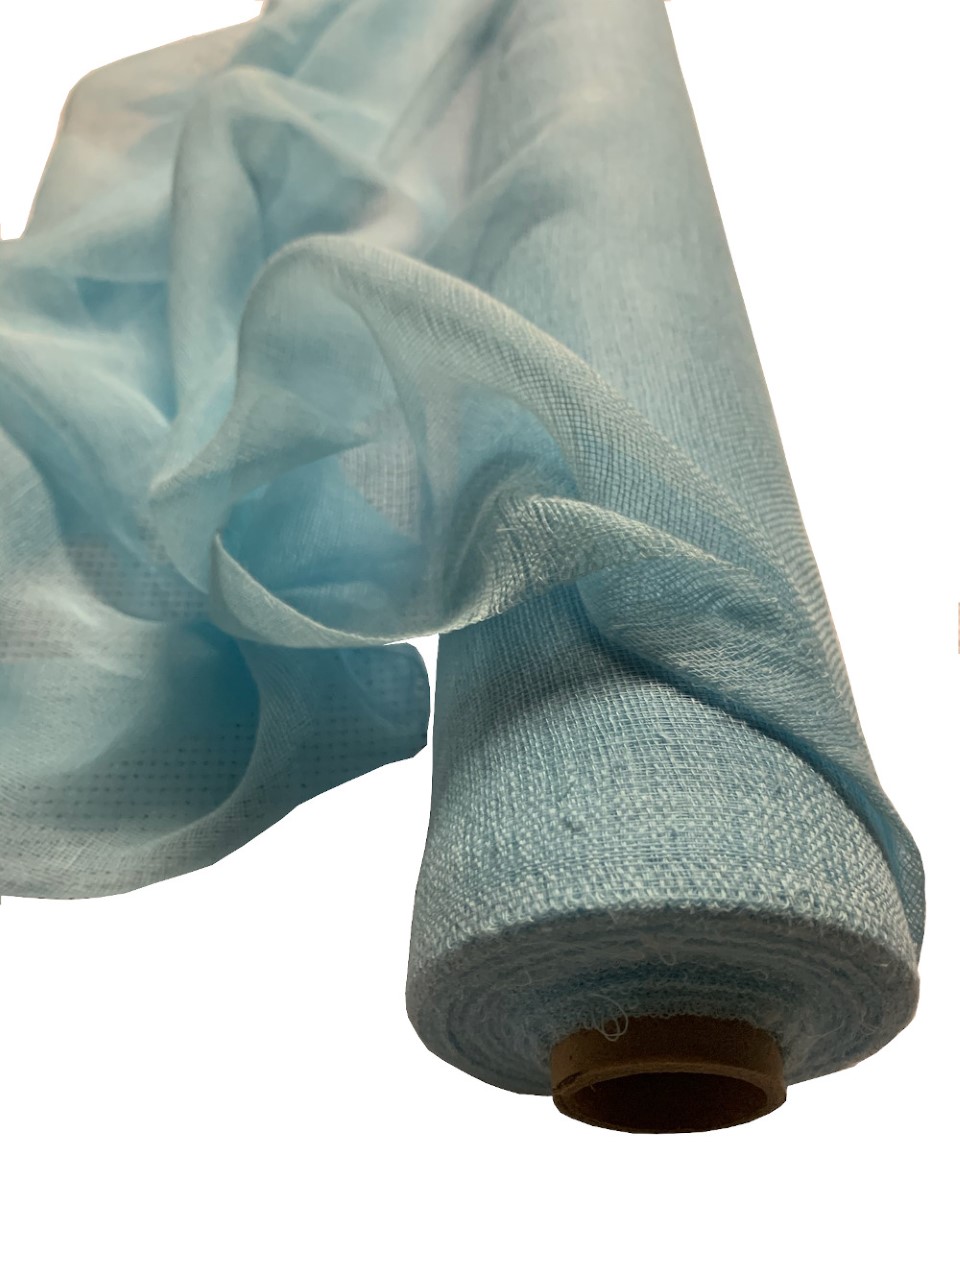 36" Wide Light Blue Cheesecloth By The Yard - 100% Cotton